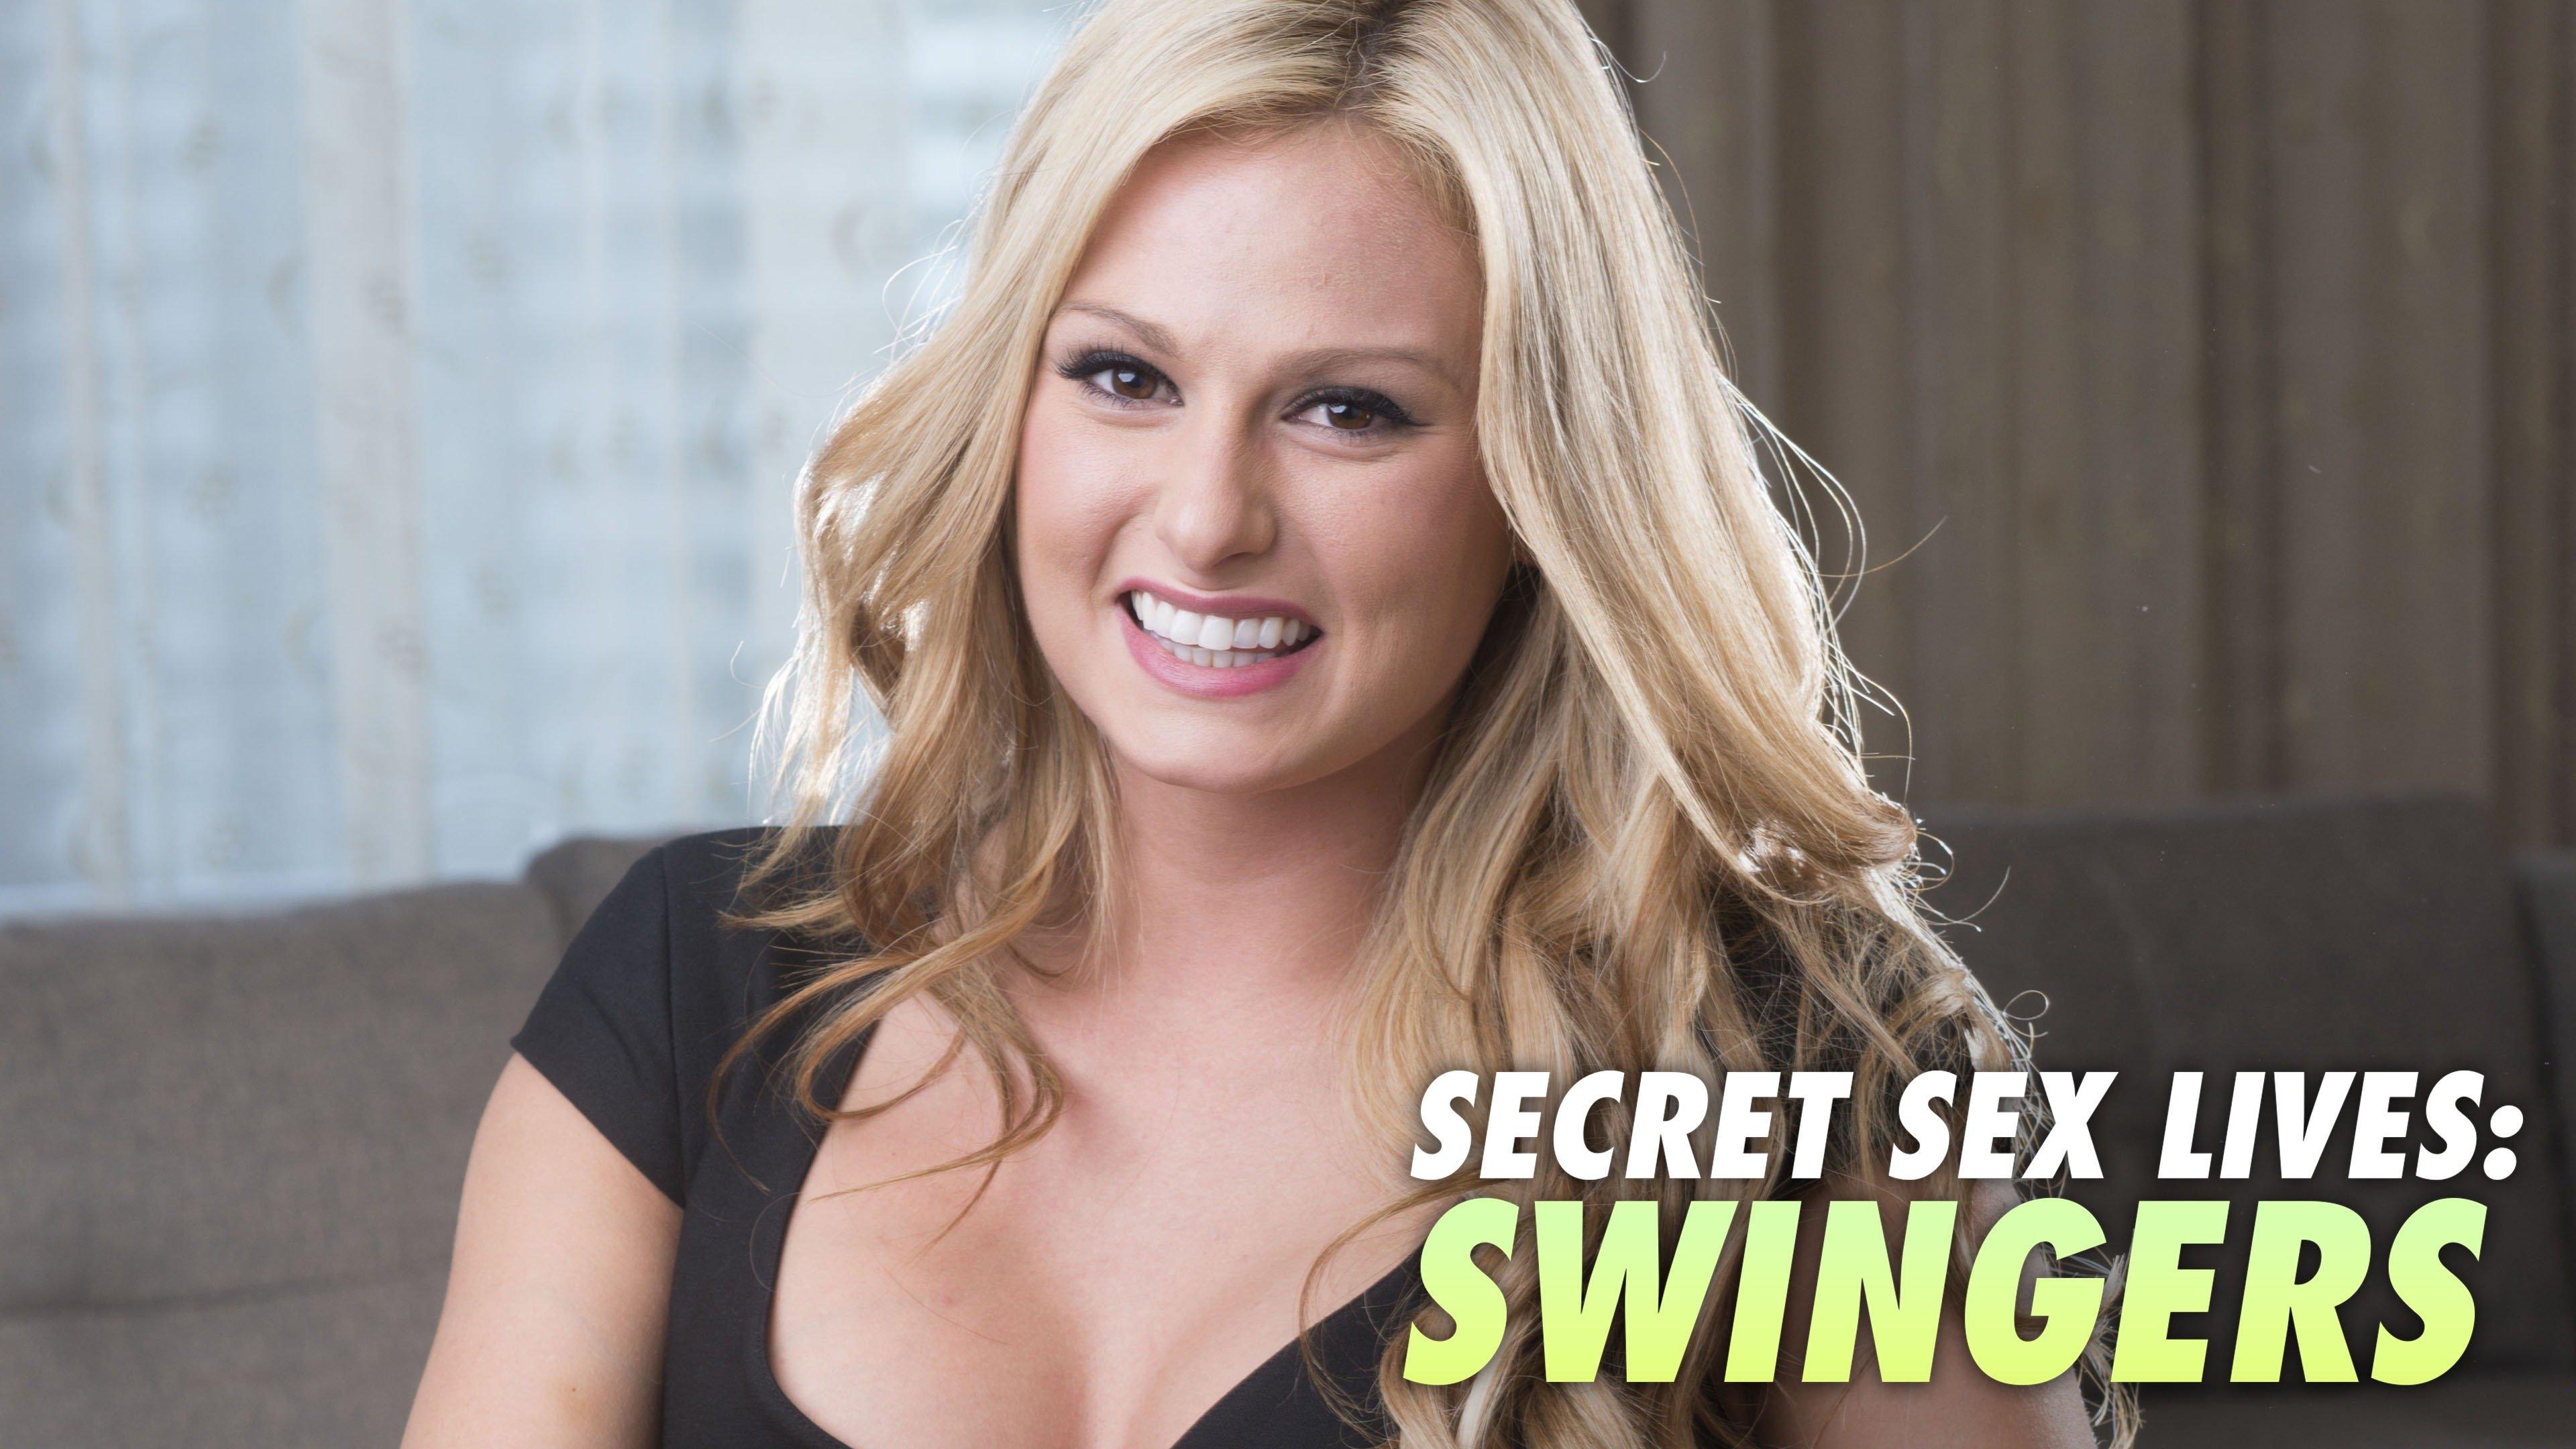 Watch Secret Sex Lives Swingers Streaming Online on Philo (Free Trial) picture